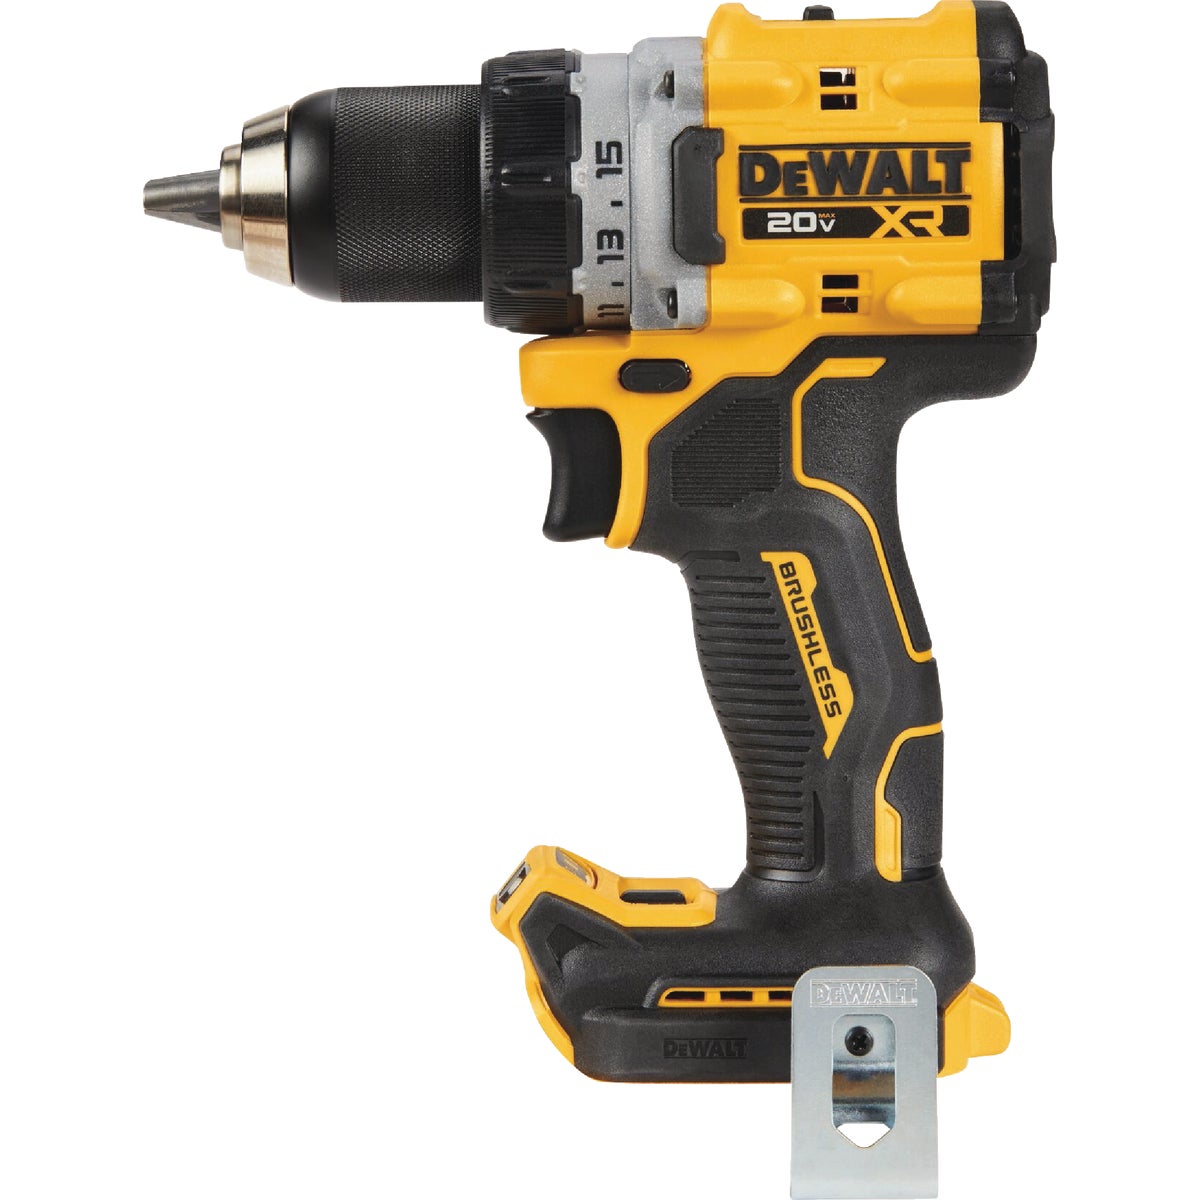 DEWALT 20-Volt MAX XR Lithium-Ion 1/2 In. Brushless Compact Cordless Drill/Driver (Tool Only)